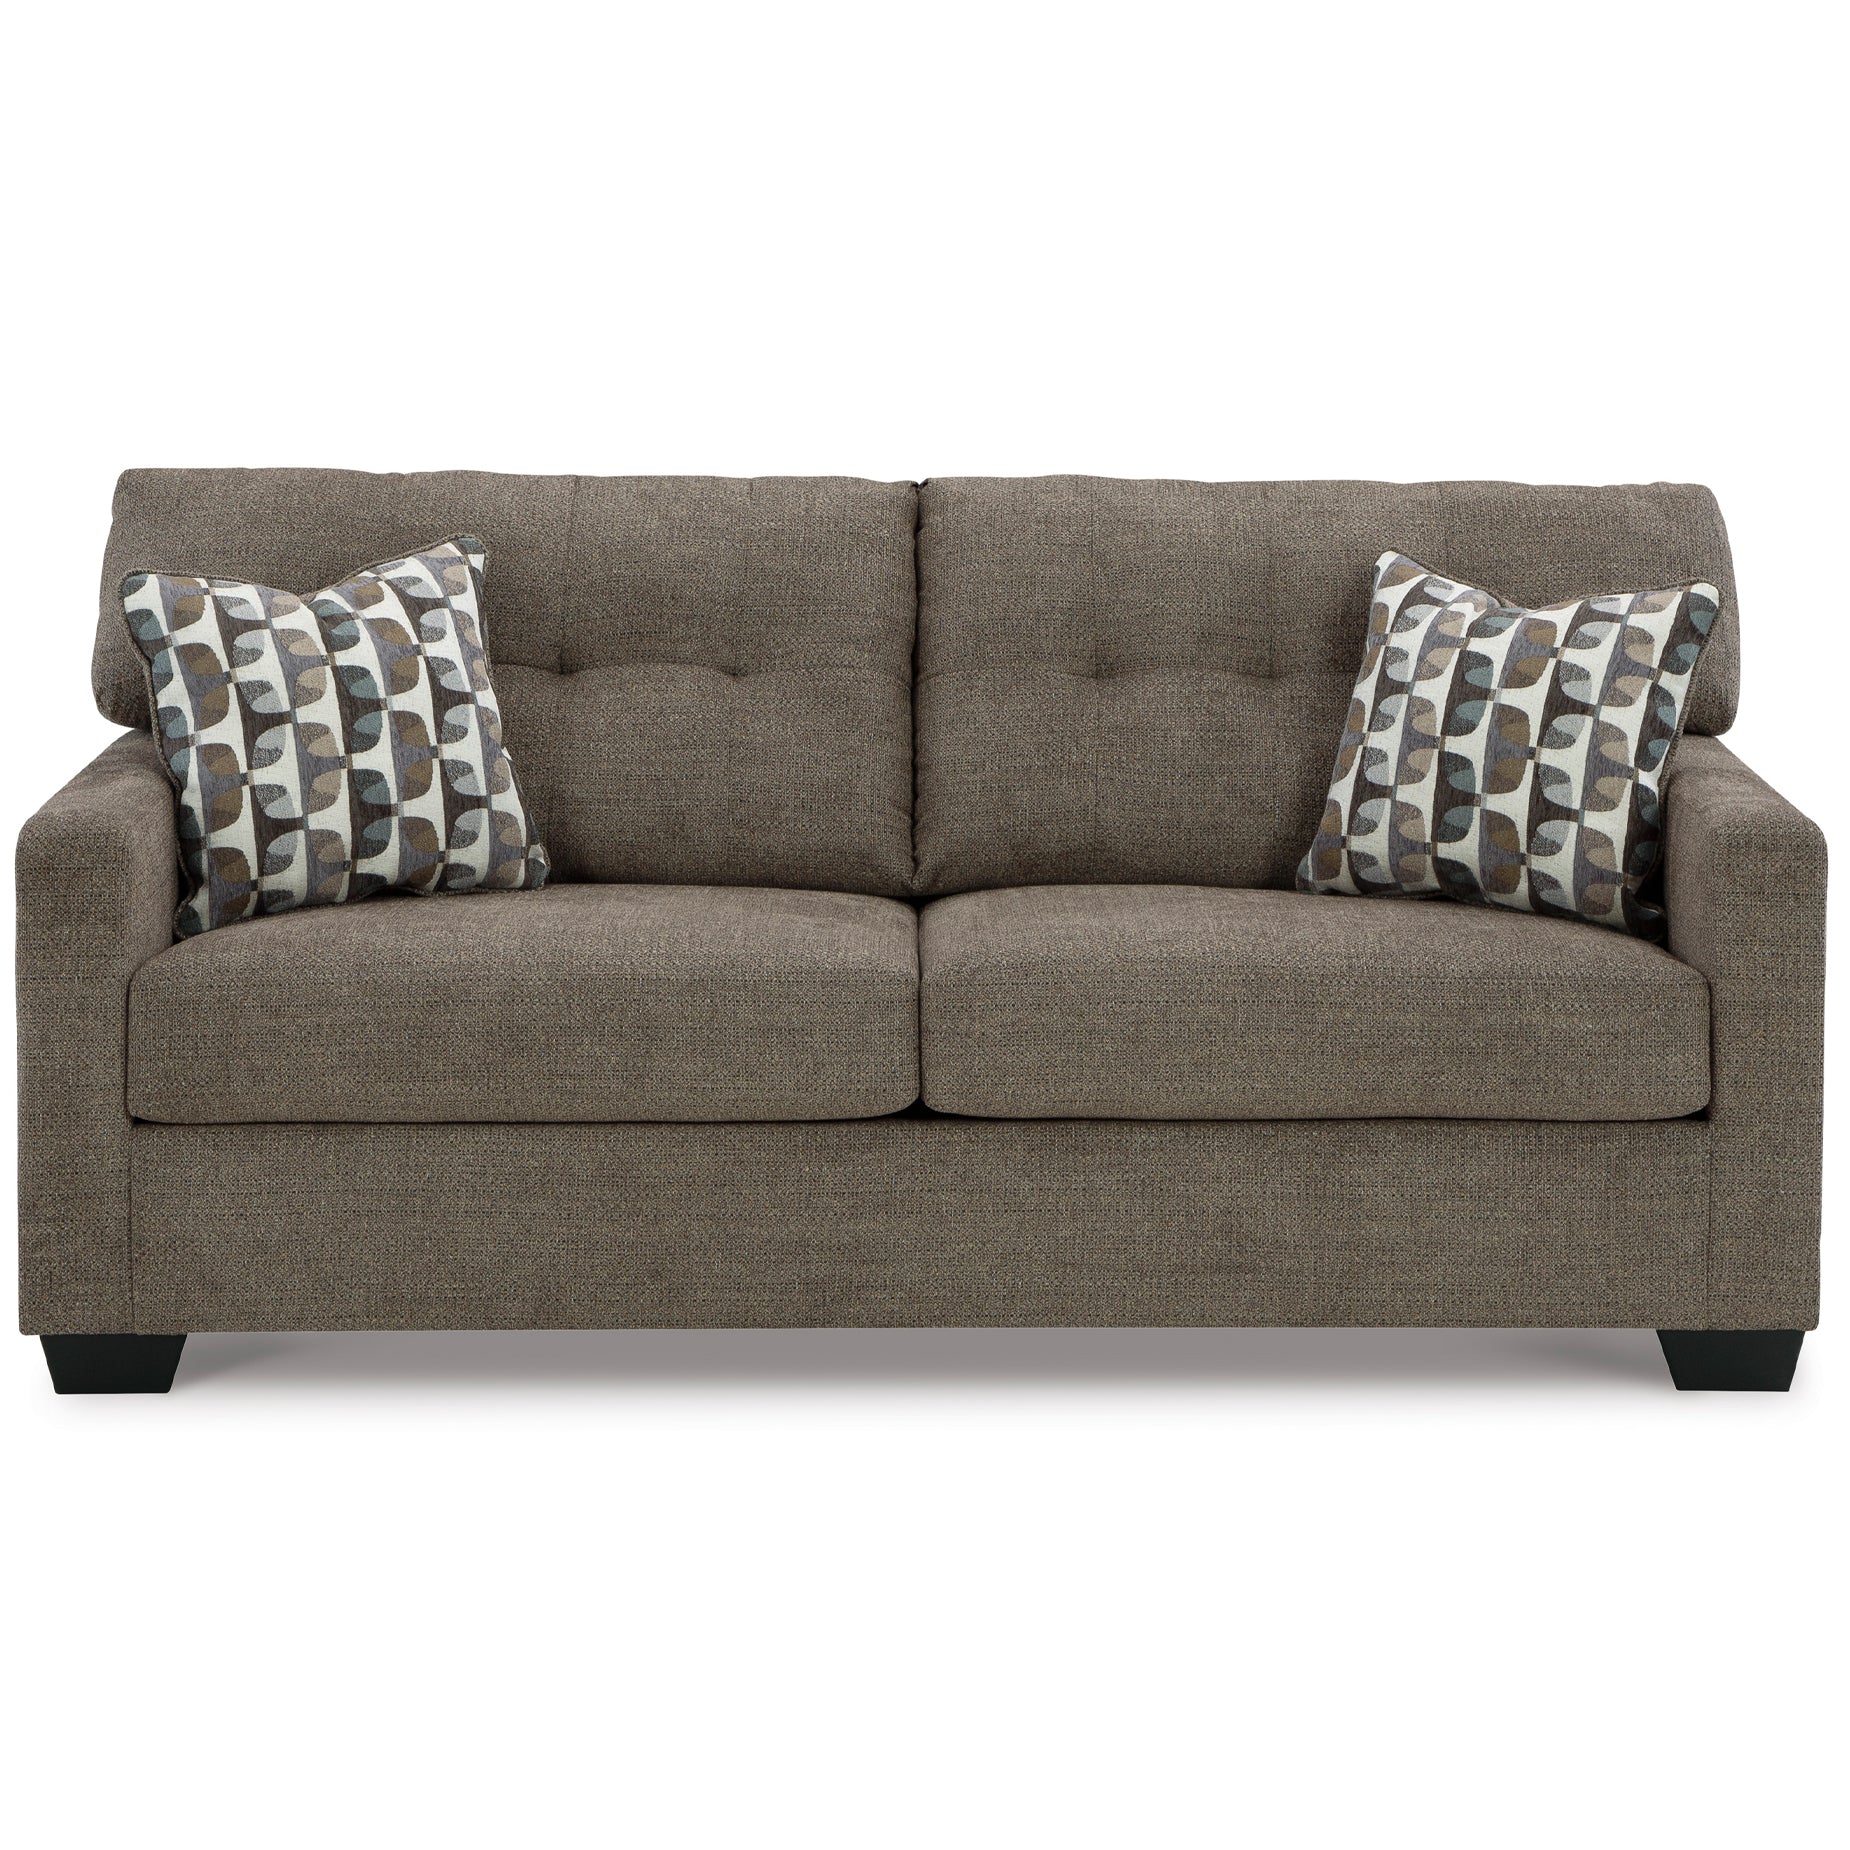 Rich chocolate-colored Mahoney Sofa, perfect for elegant and cozy living spaces